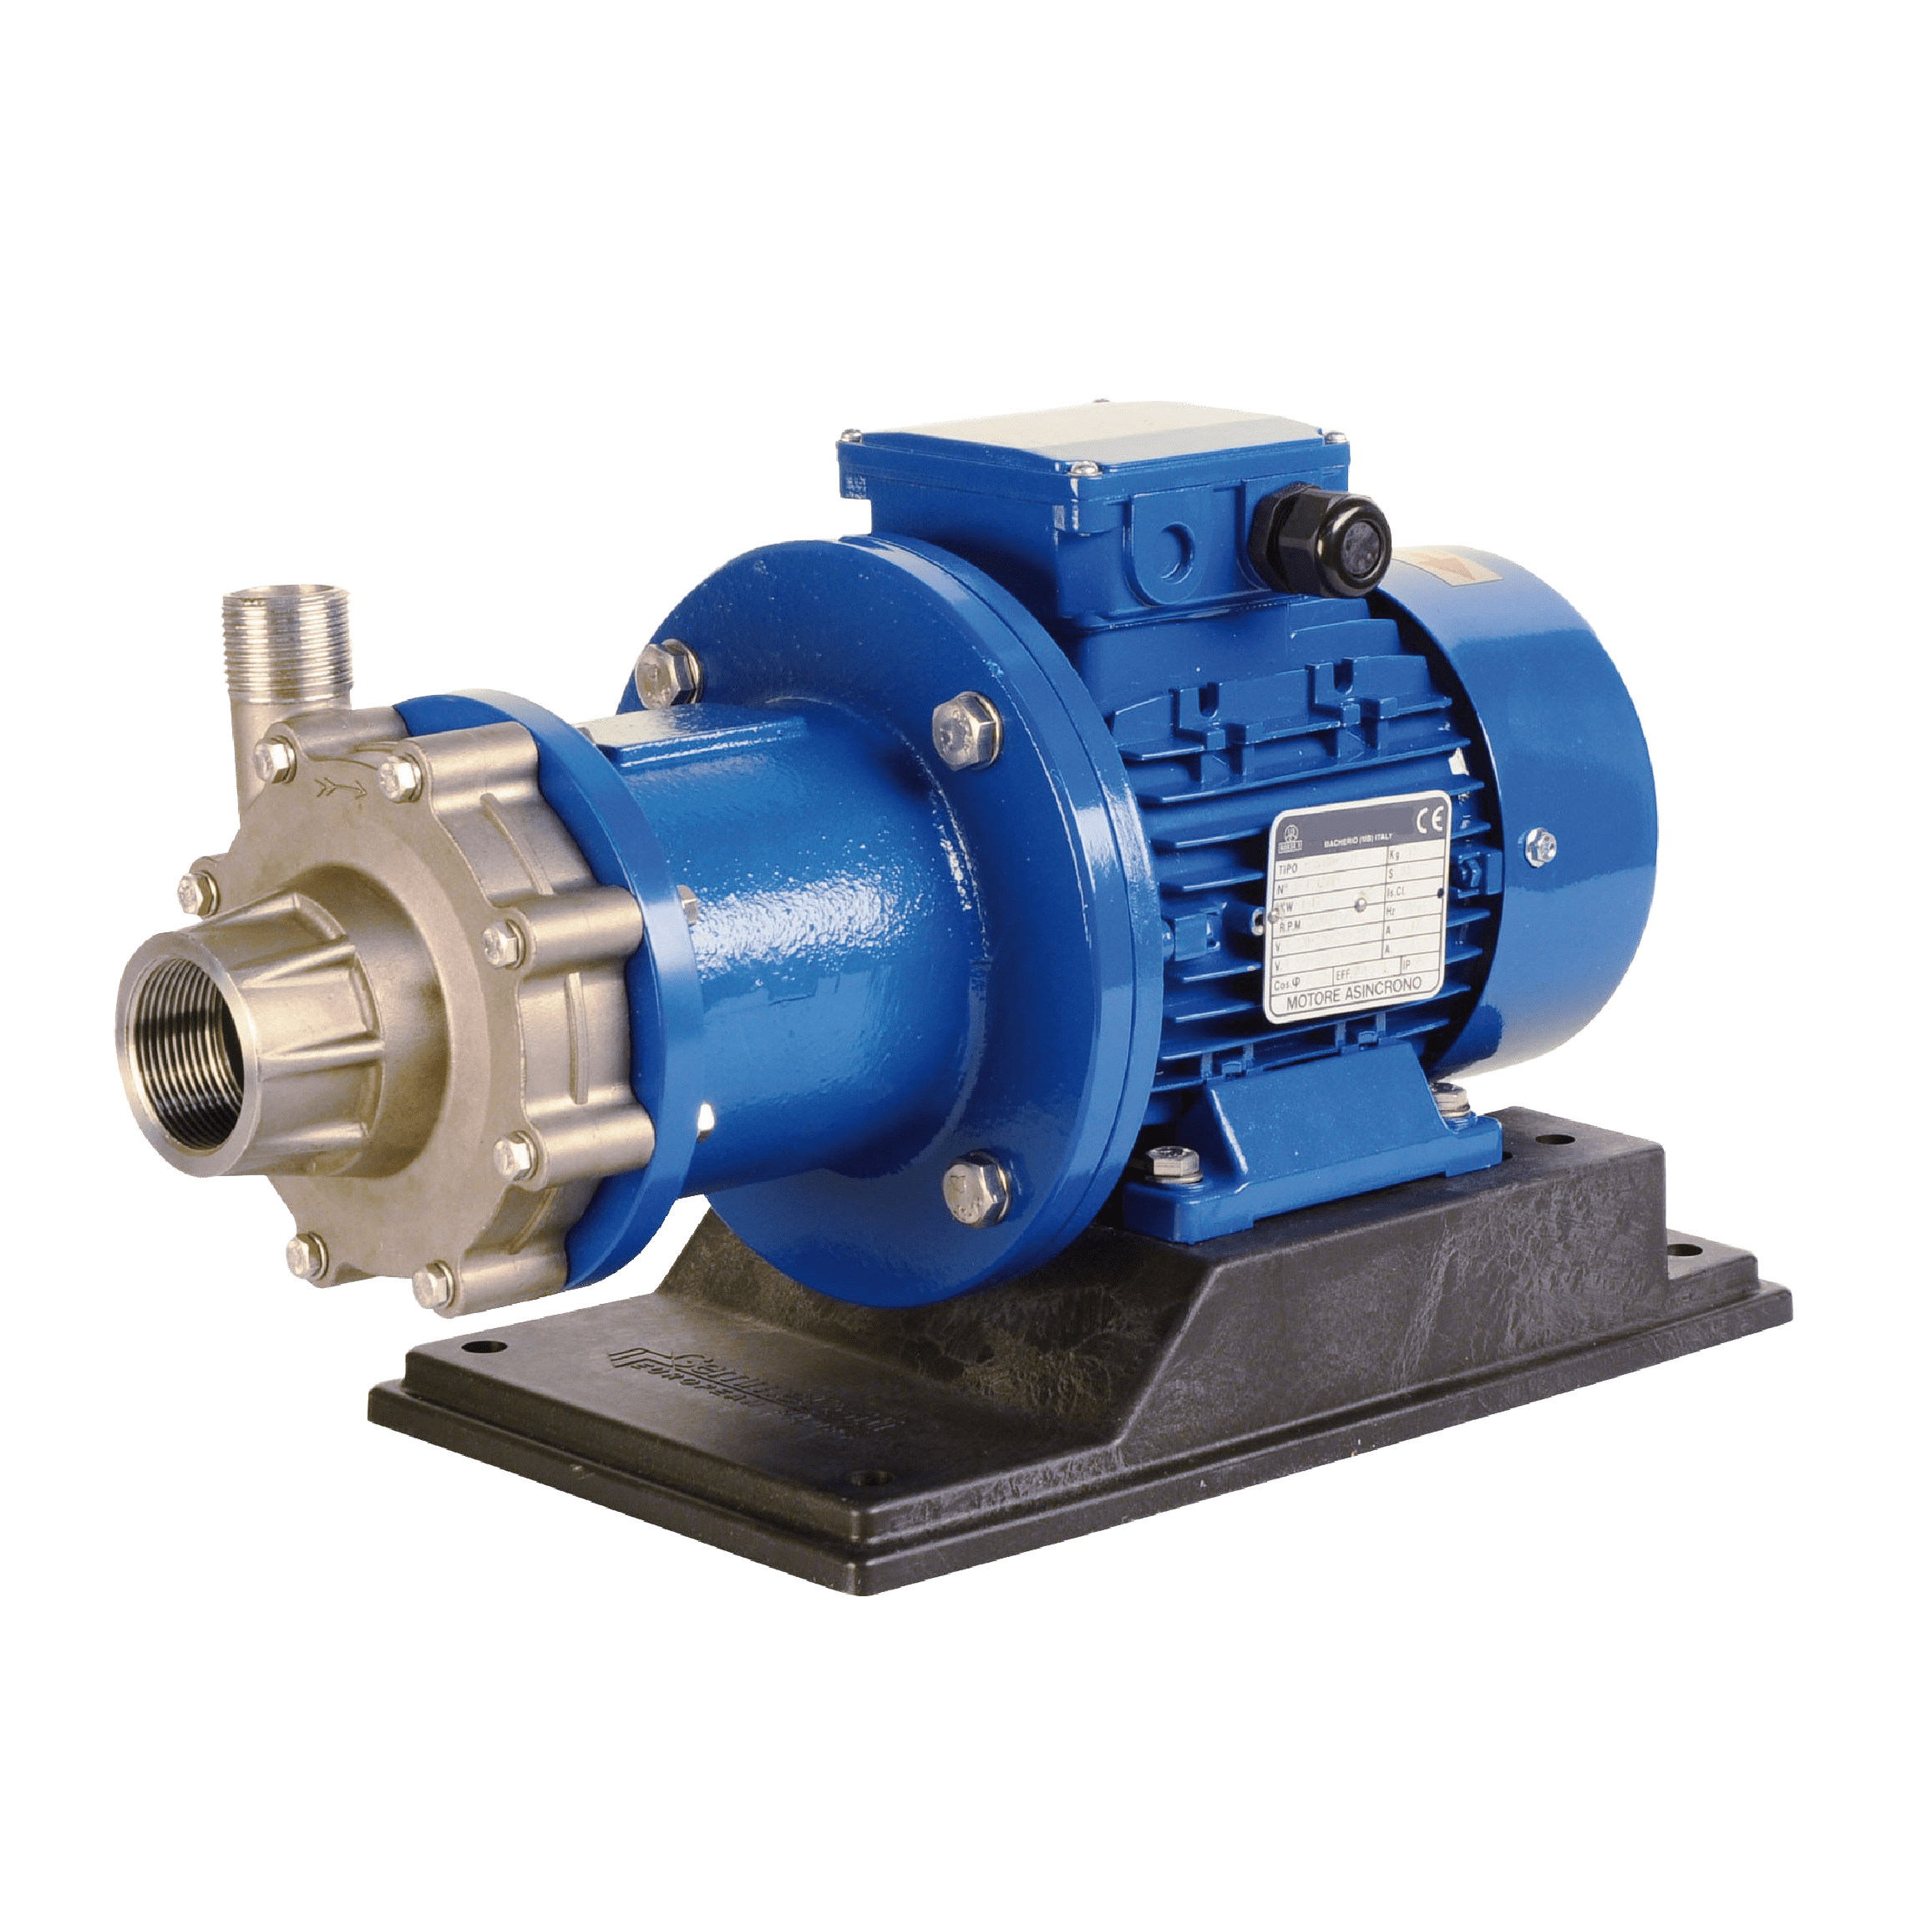 HTM SS – Magnetic drive centrifugal pumps in stainless steel AISI 316